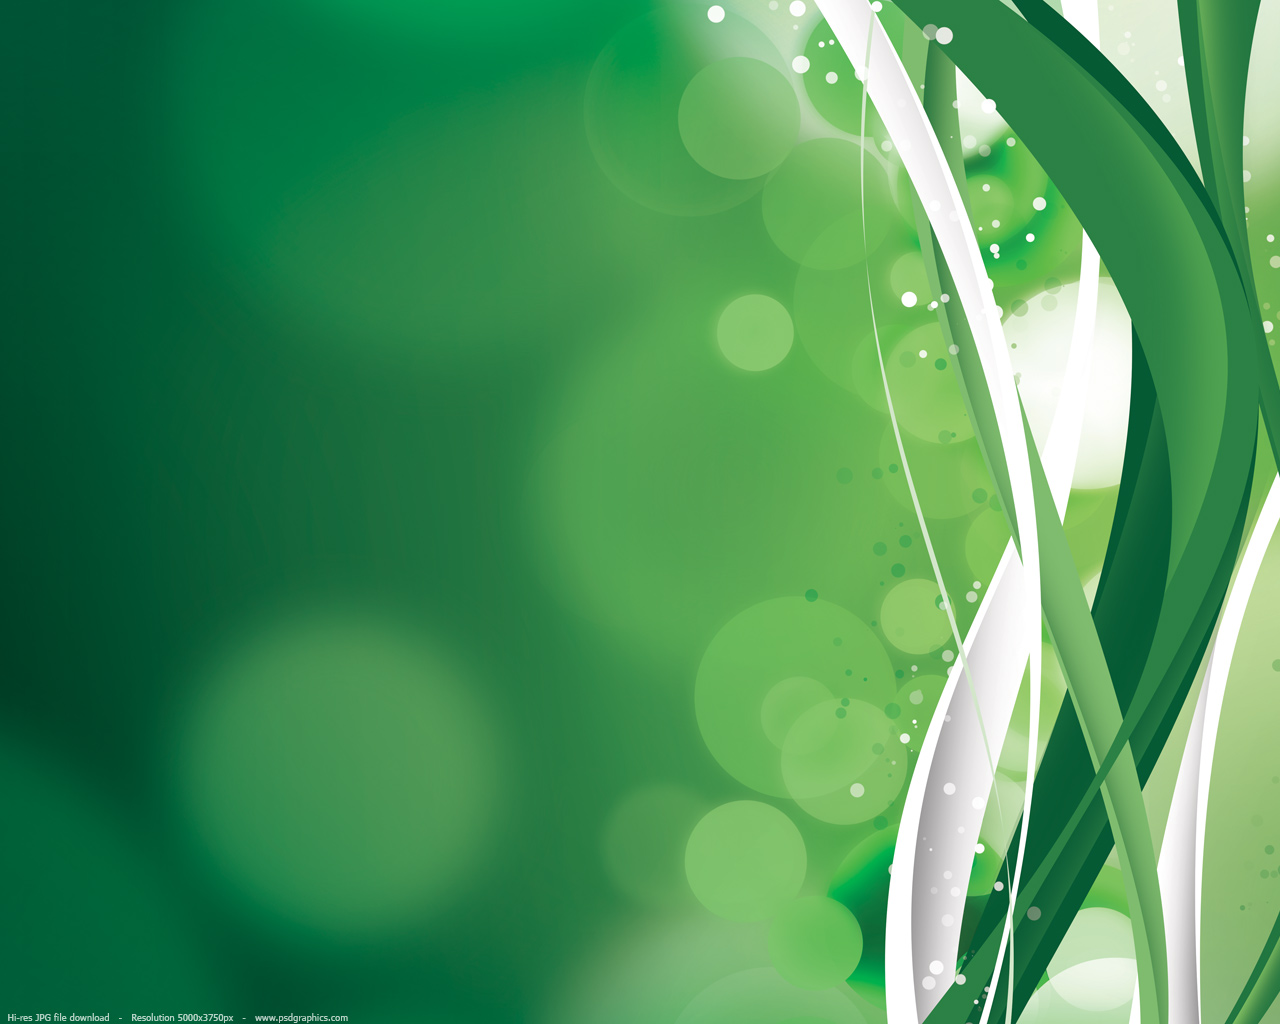 Theme Green White Keywords Living Design Concept Abstract Nature